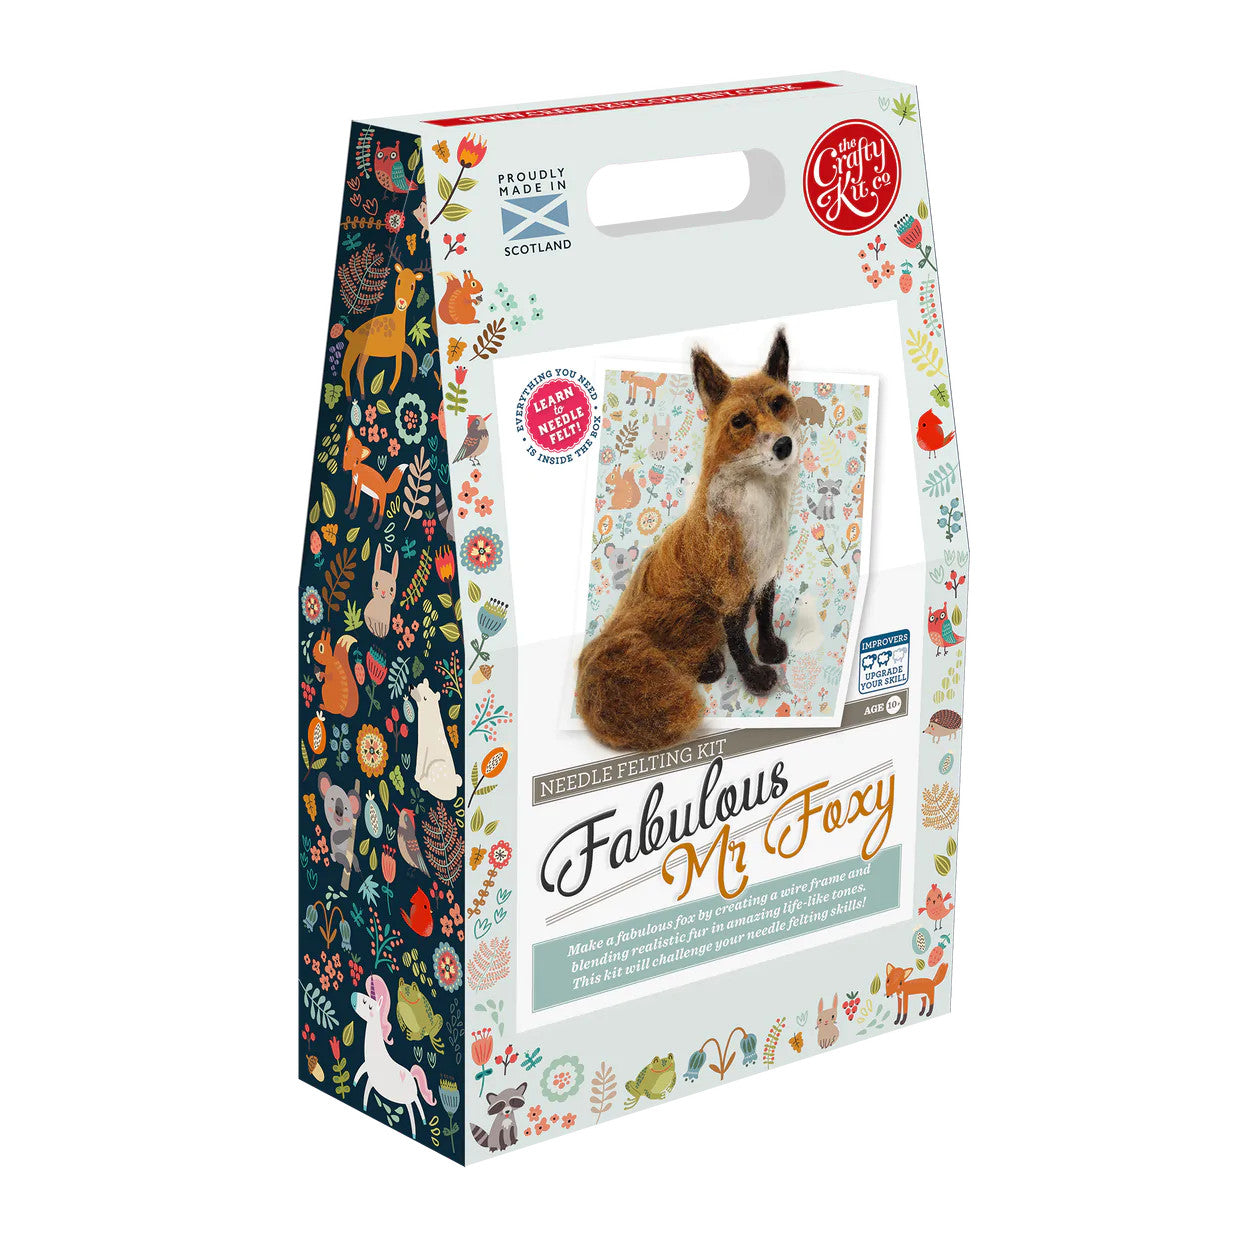 Fabulous Mr Foxy Needle Felting Kit from The Crafty Kit Co. Made in Scotland